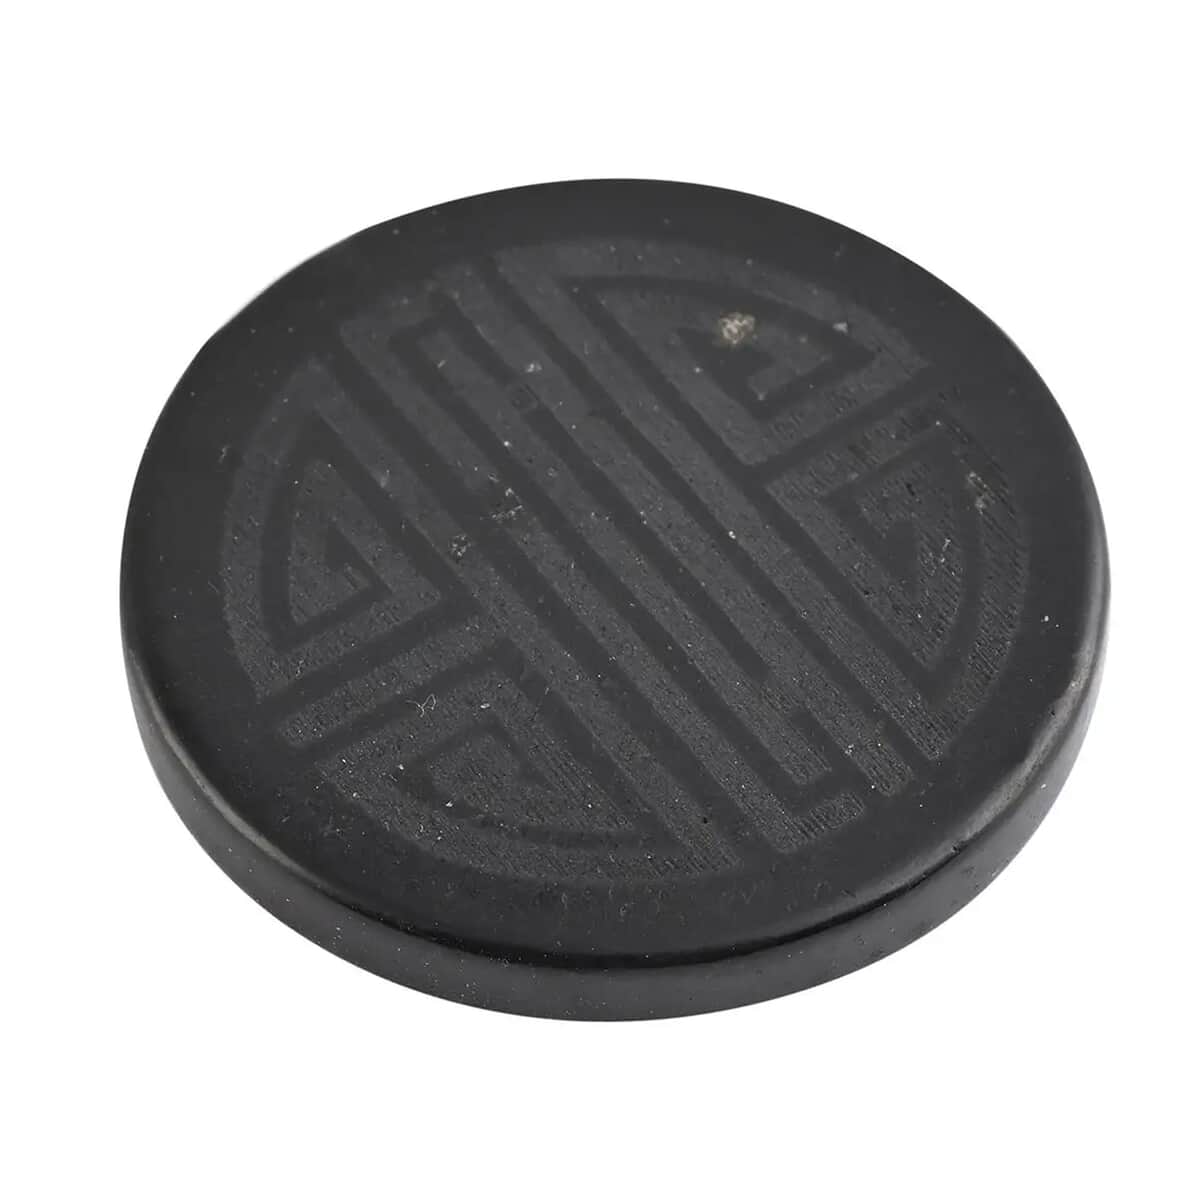 Shungite 4 Seasons Engraved Round Cellphone Tile, Decorative Black Mineral Tile for Mobile Phones 1.25 Approx. 35ctw image number 3